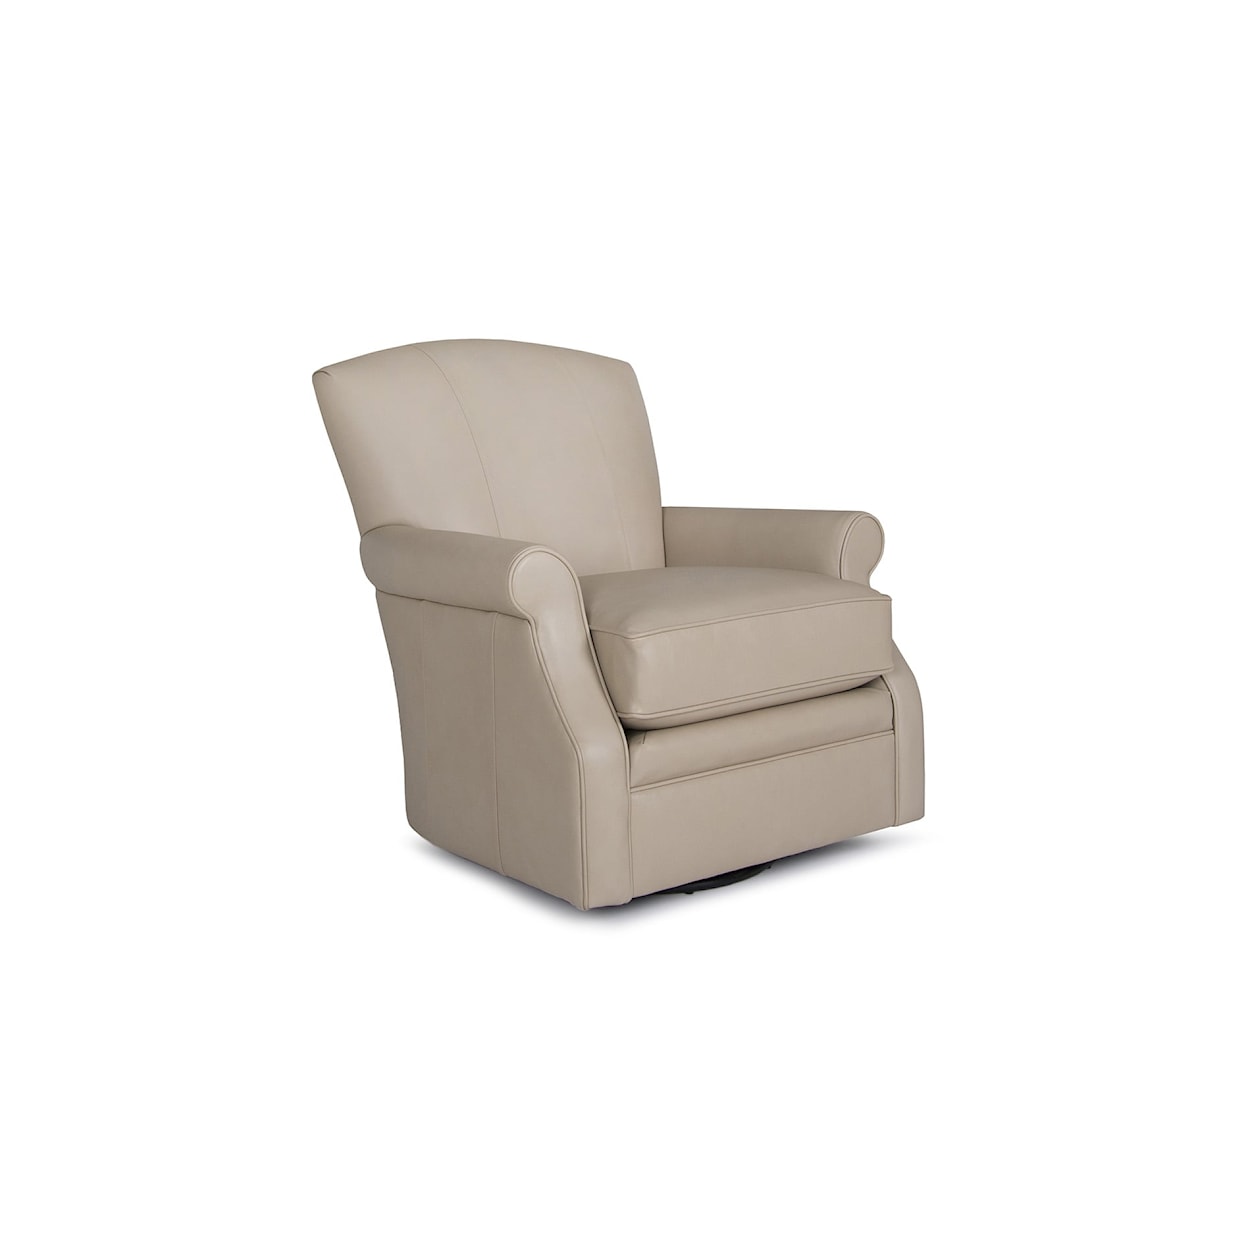 Smith Brothers 536 Swivel Glider Chair